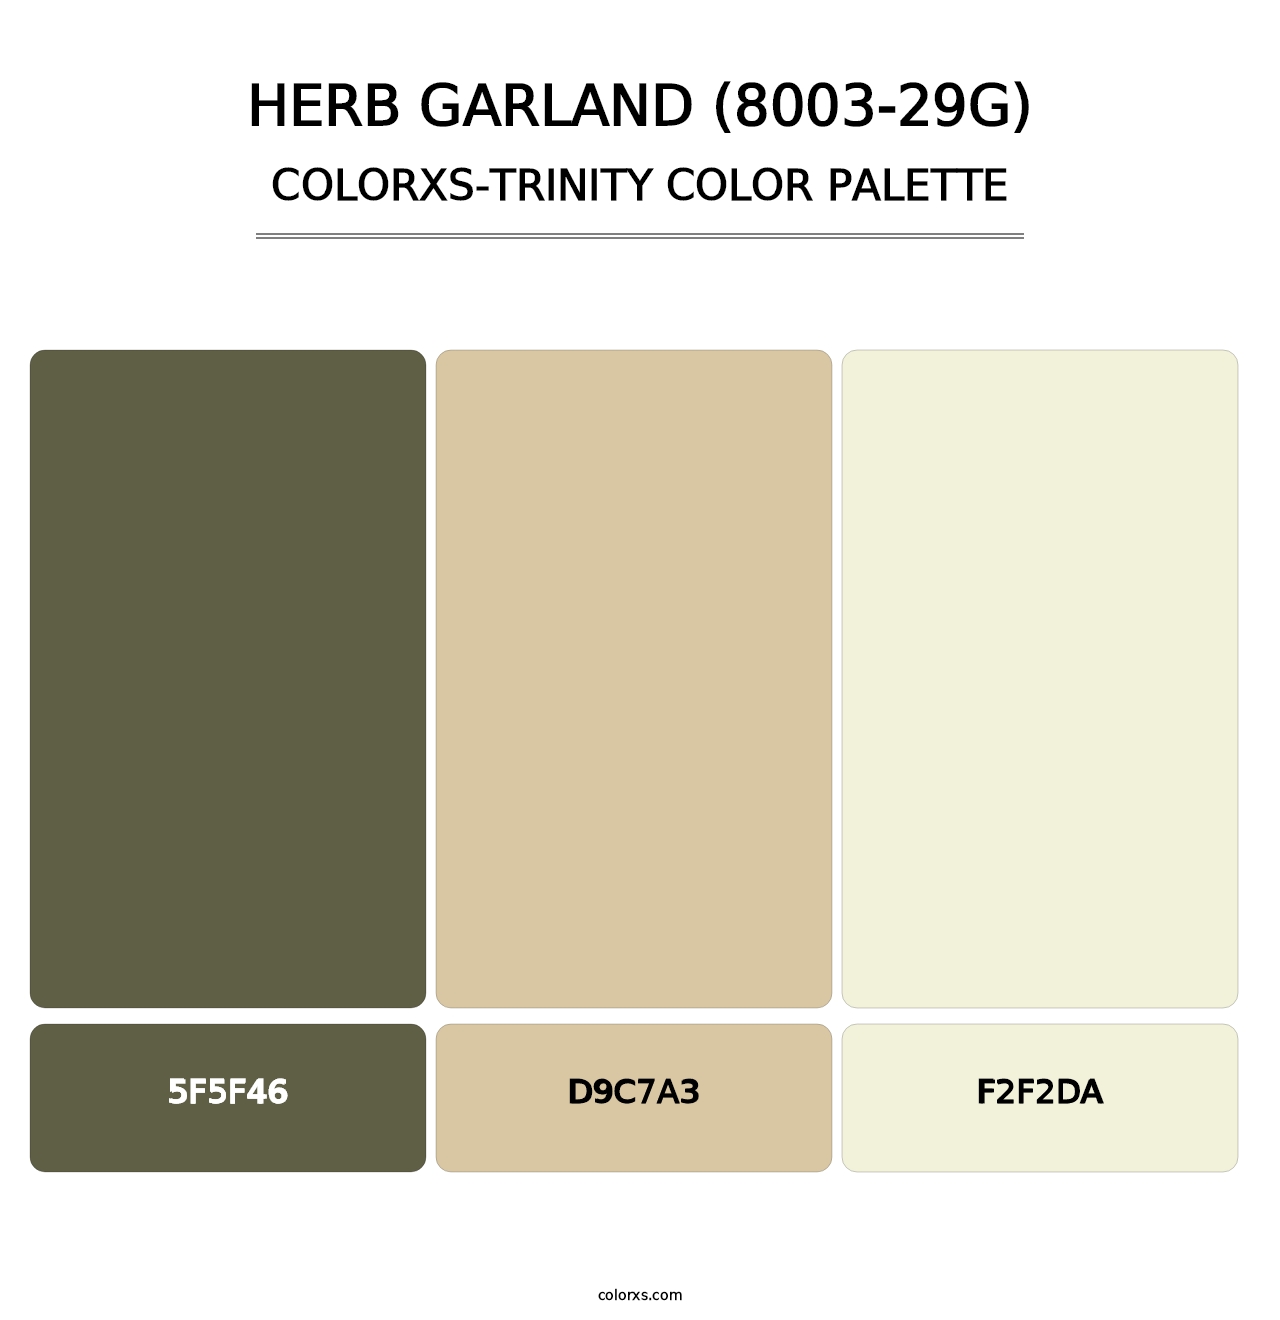 Herb Garland (8003-29G) - Colorxs Trinity Palette